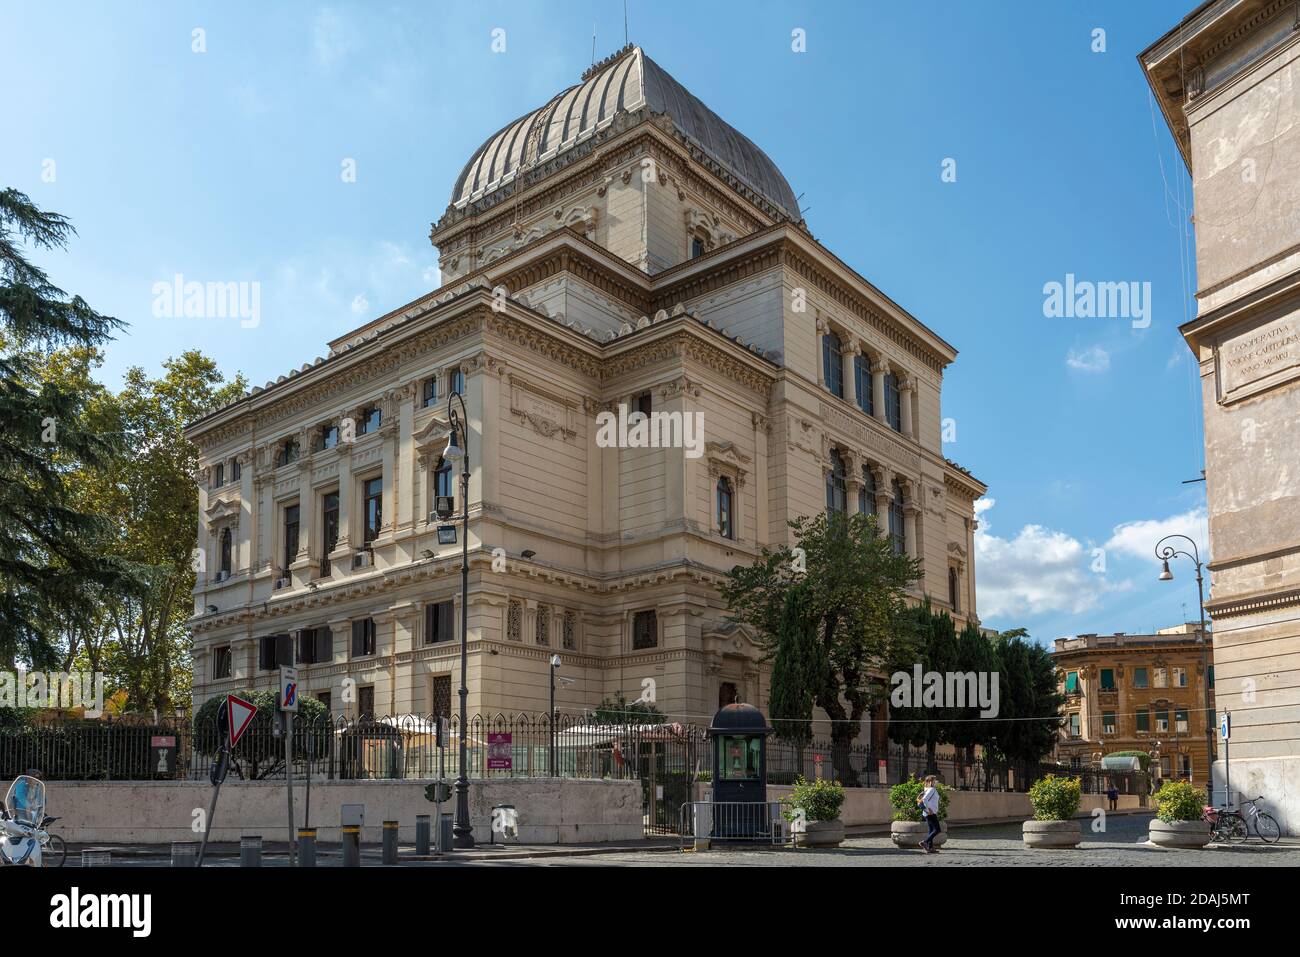 The Great temple of Rome is the synagogue in Rome in the Jewish ghetto. Rome, Lazio, Italy, Europe Stock Photo